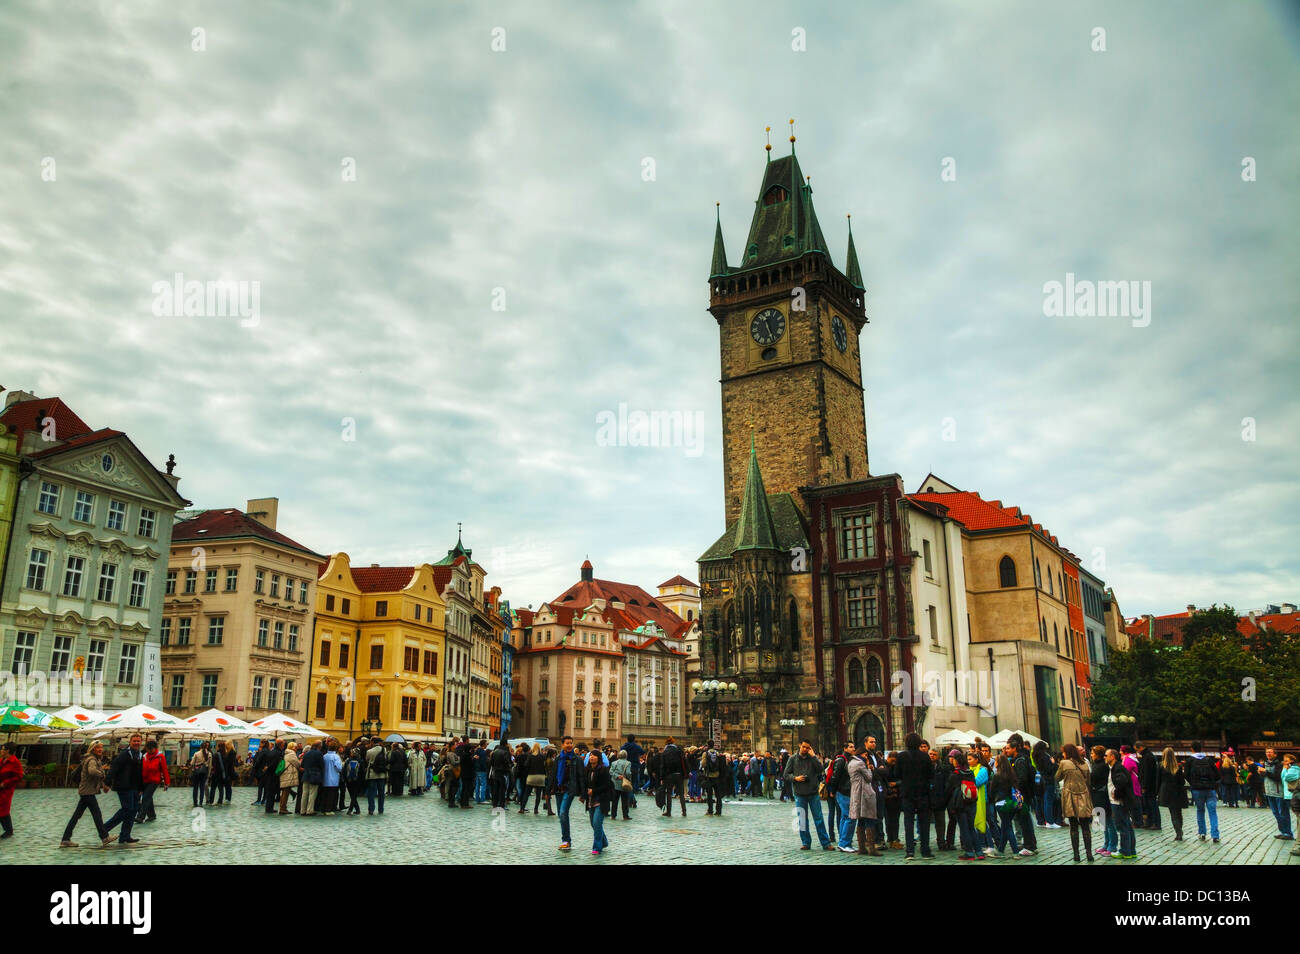 Old Town Square with tourists in Prague. Old Town Square is a historic square in the Old Town. Stock Photo